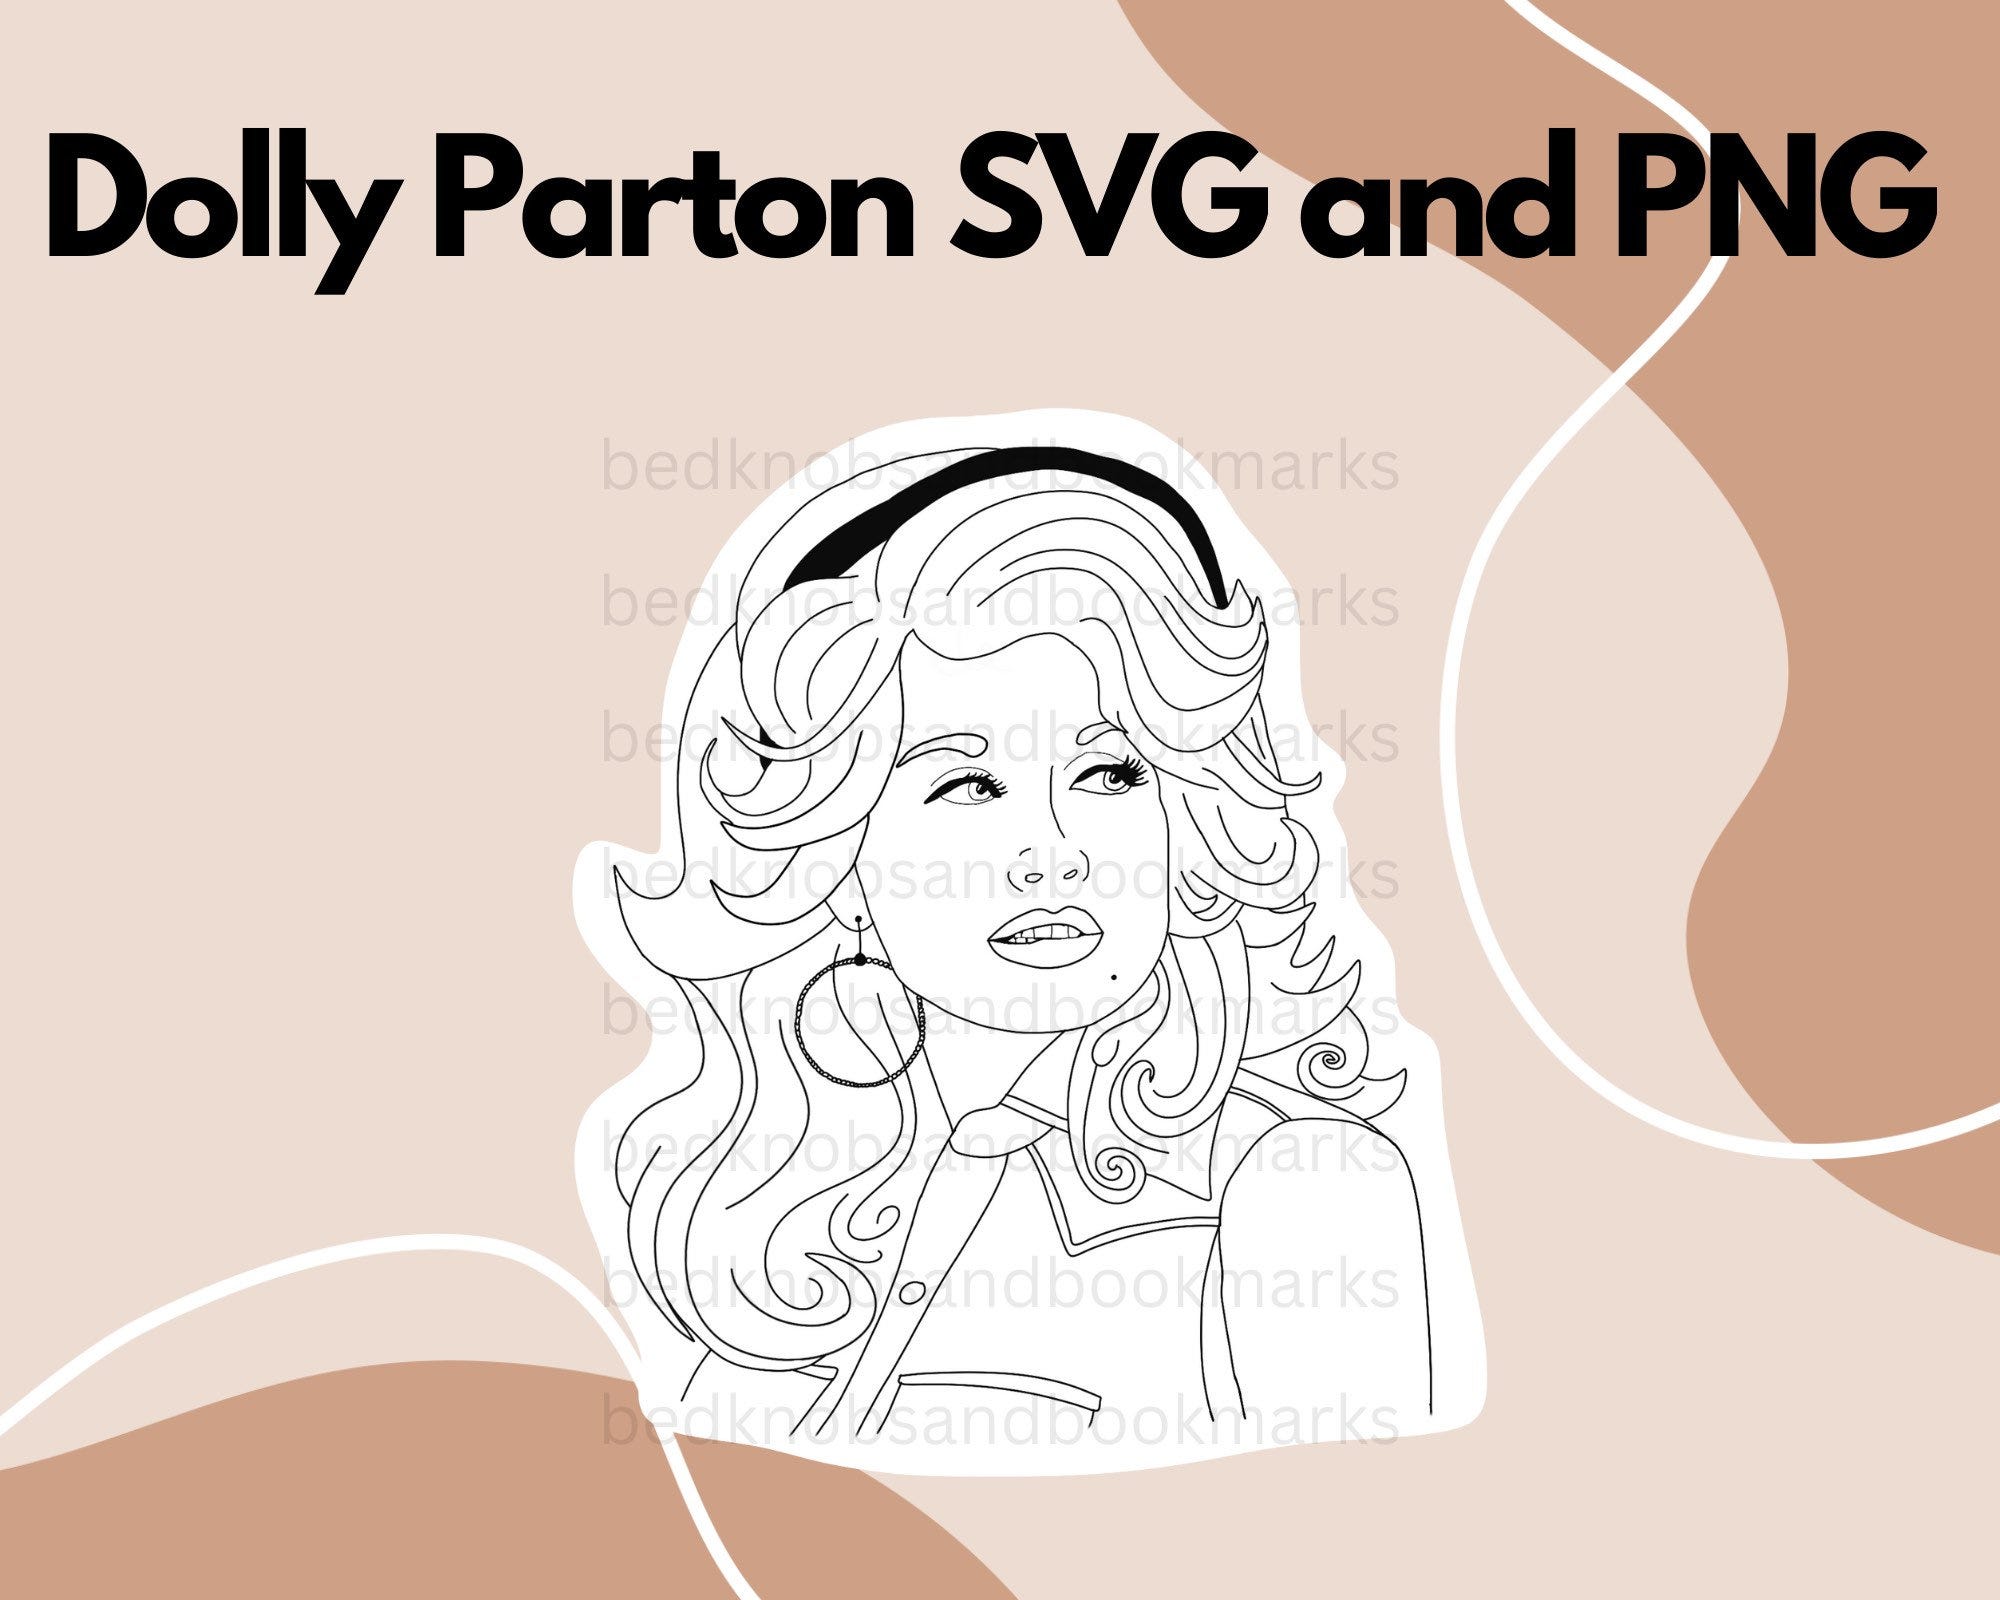 Dolly Parton SVG and PNG